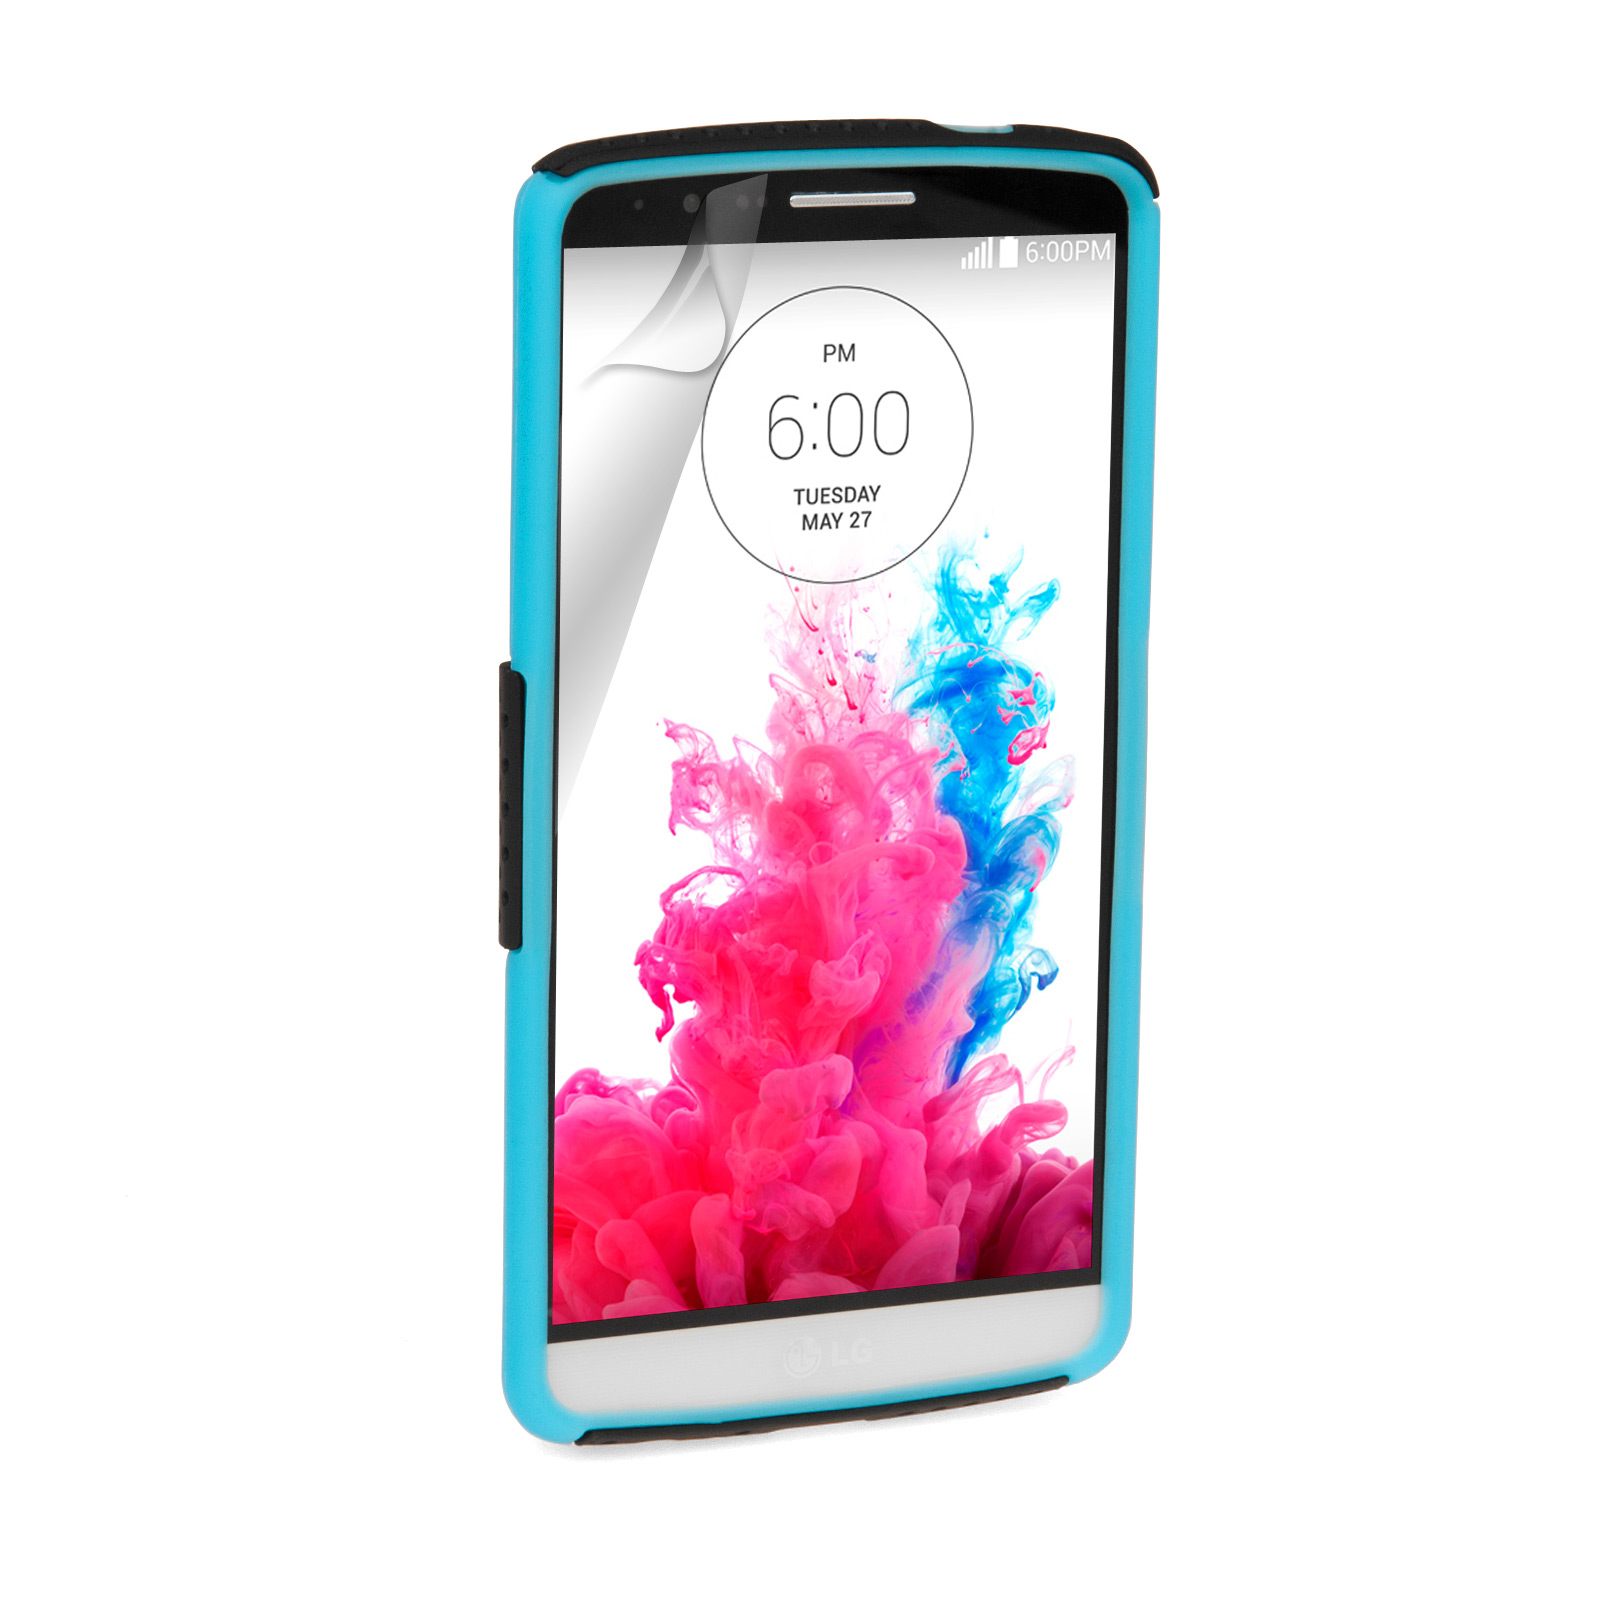 YouSave Accessories LG G3 Tough Mesh Combo Silicone Case - Blue-Black